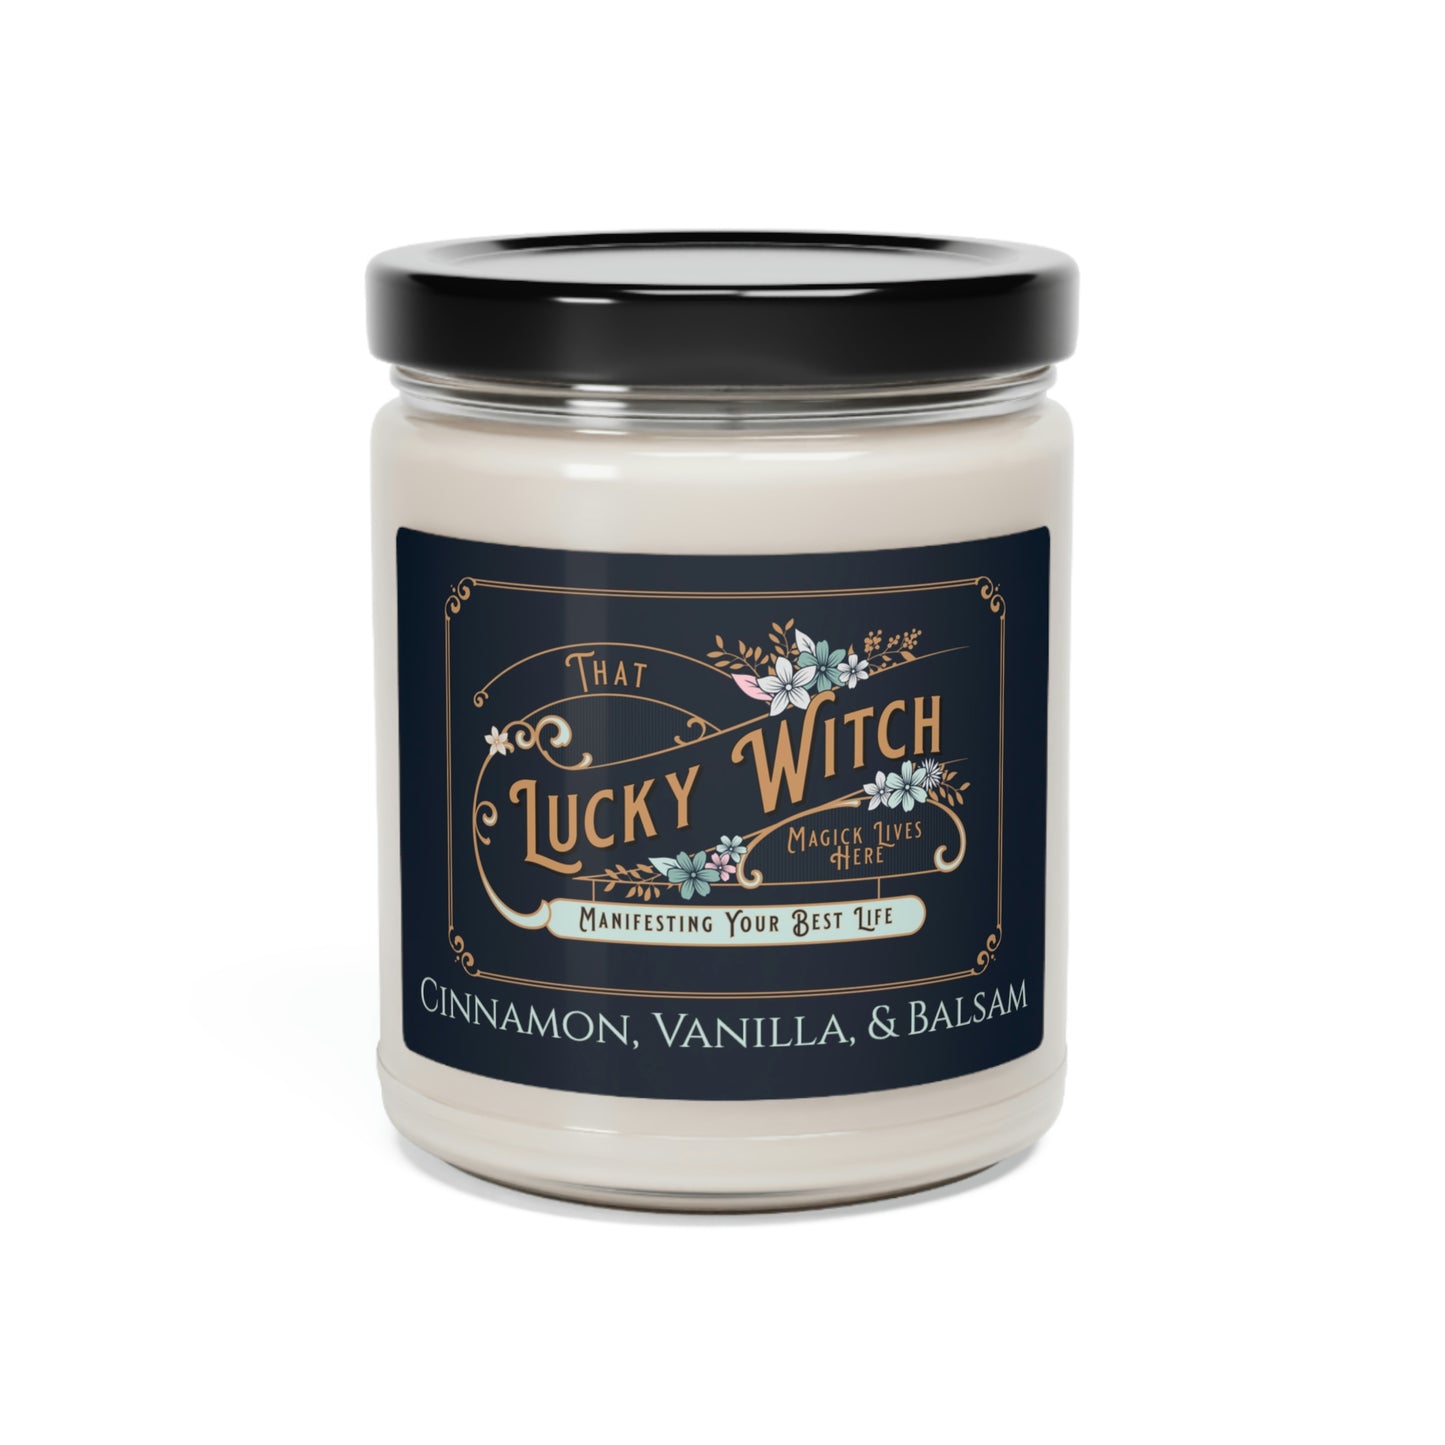 Cinnamon, Vanilla, and Balsam Scented Soy Candle, 9oz